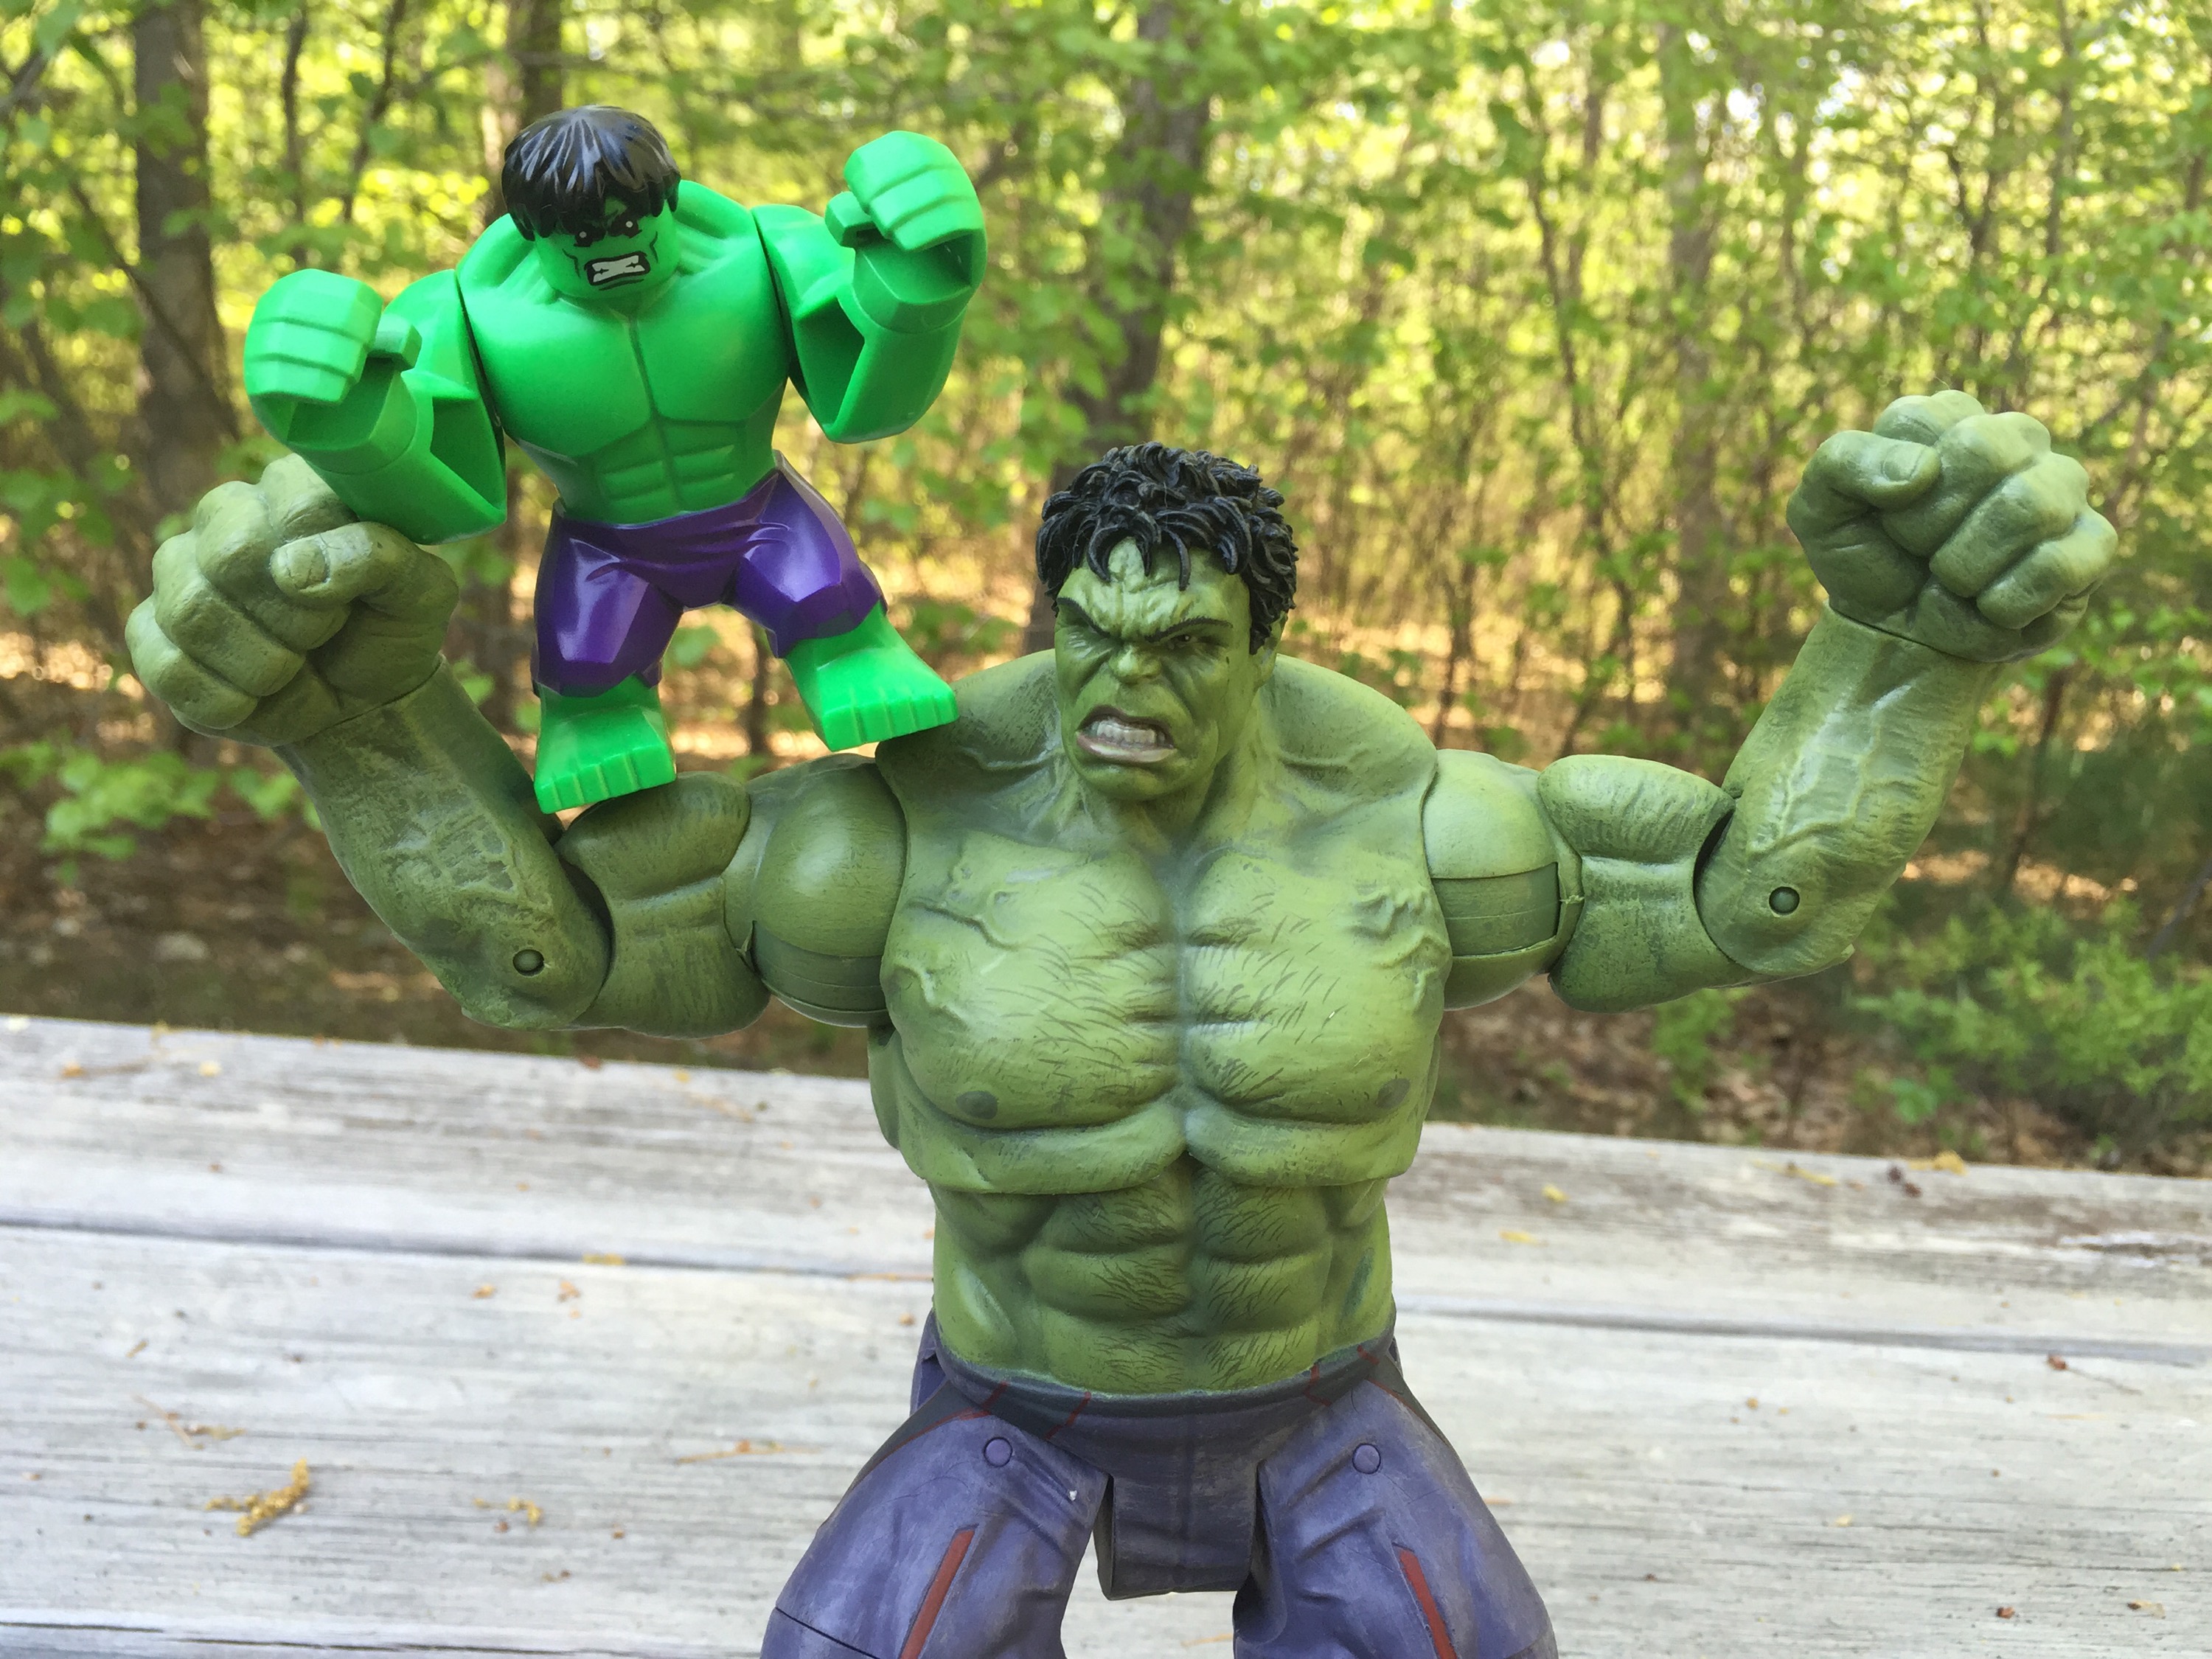 Review and photos of Gamma Smash Hulk action figure by Hasbro